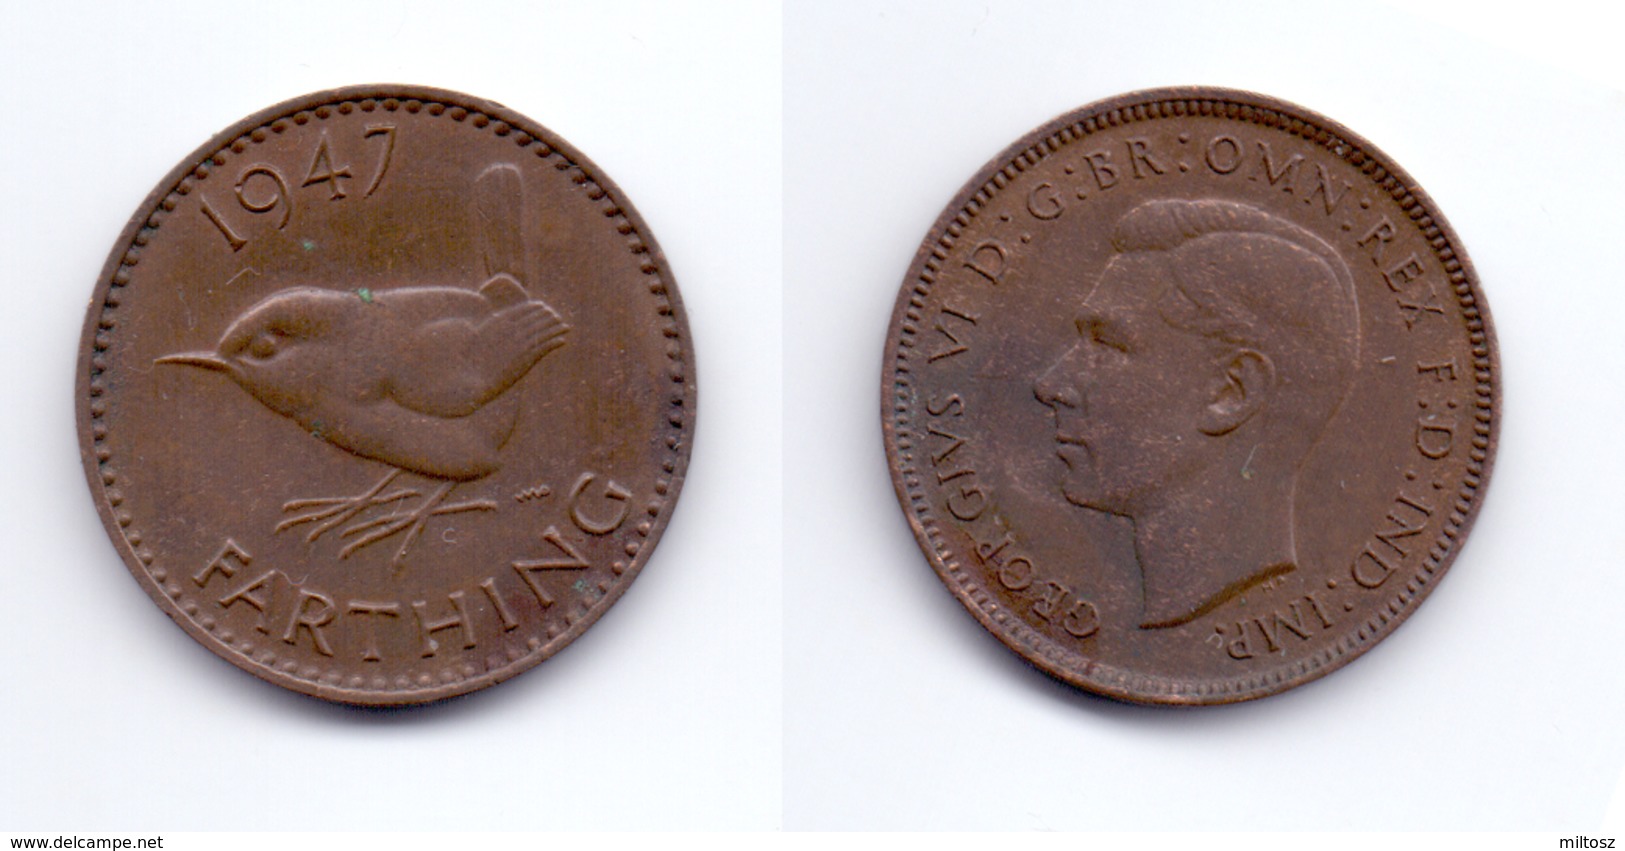 Great Britain 1/4 Penny 1947 - B. 1 Farthing